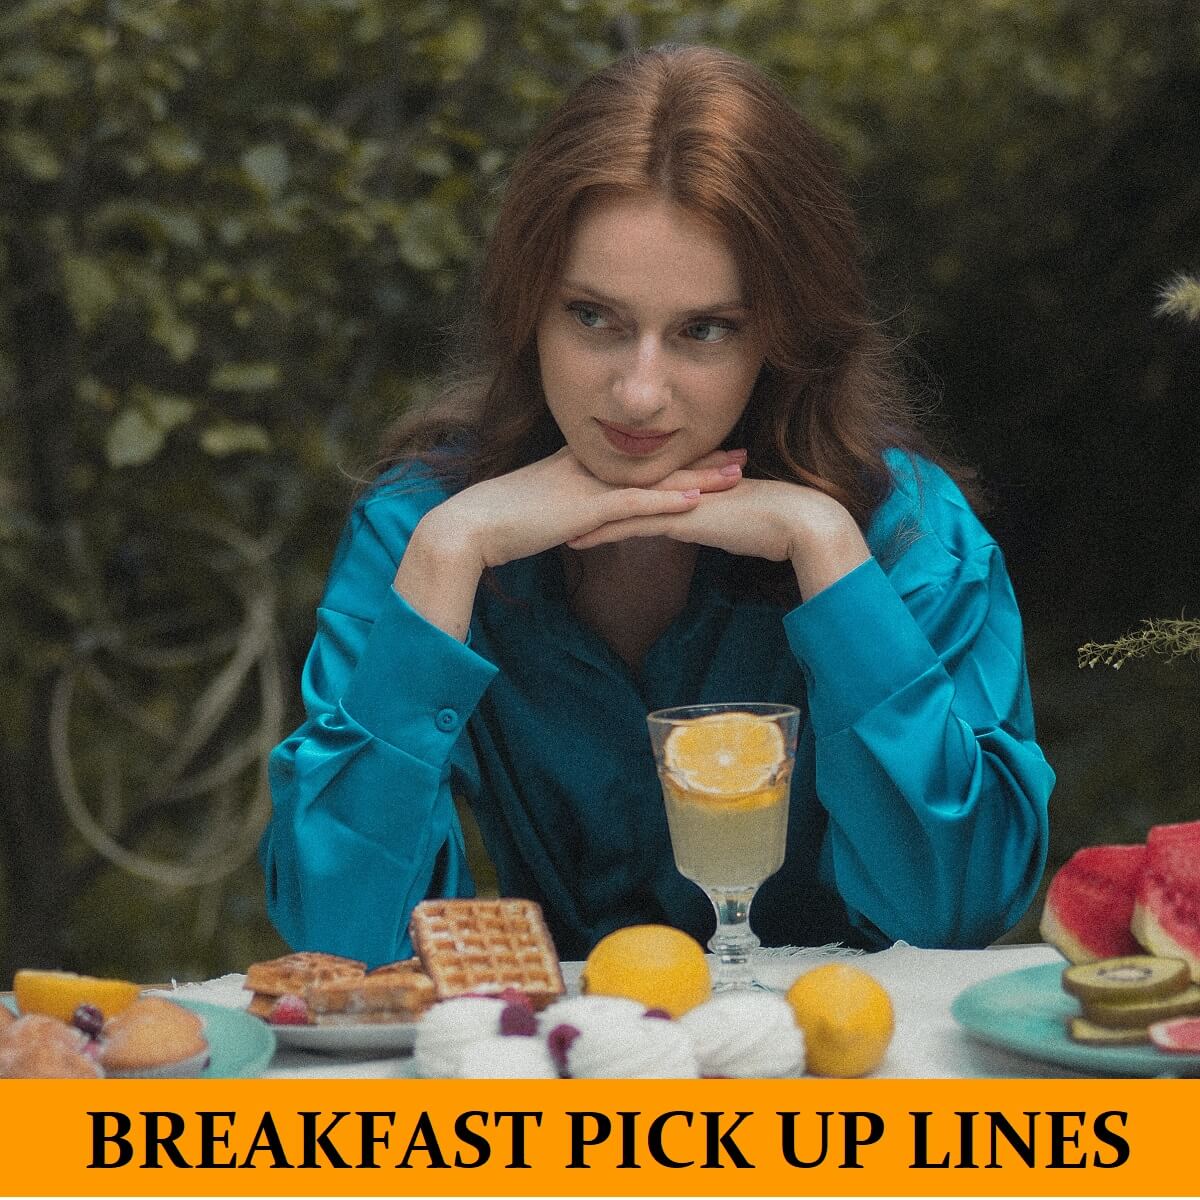 Pick Up Lines About Breakfast